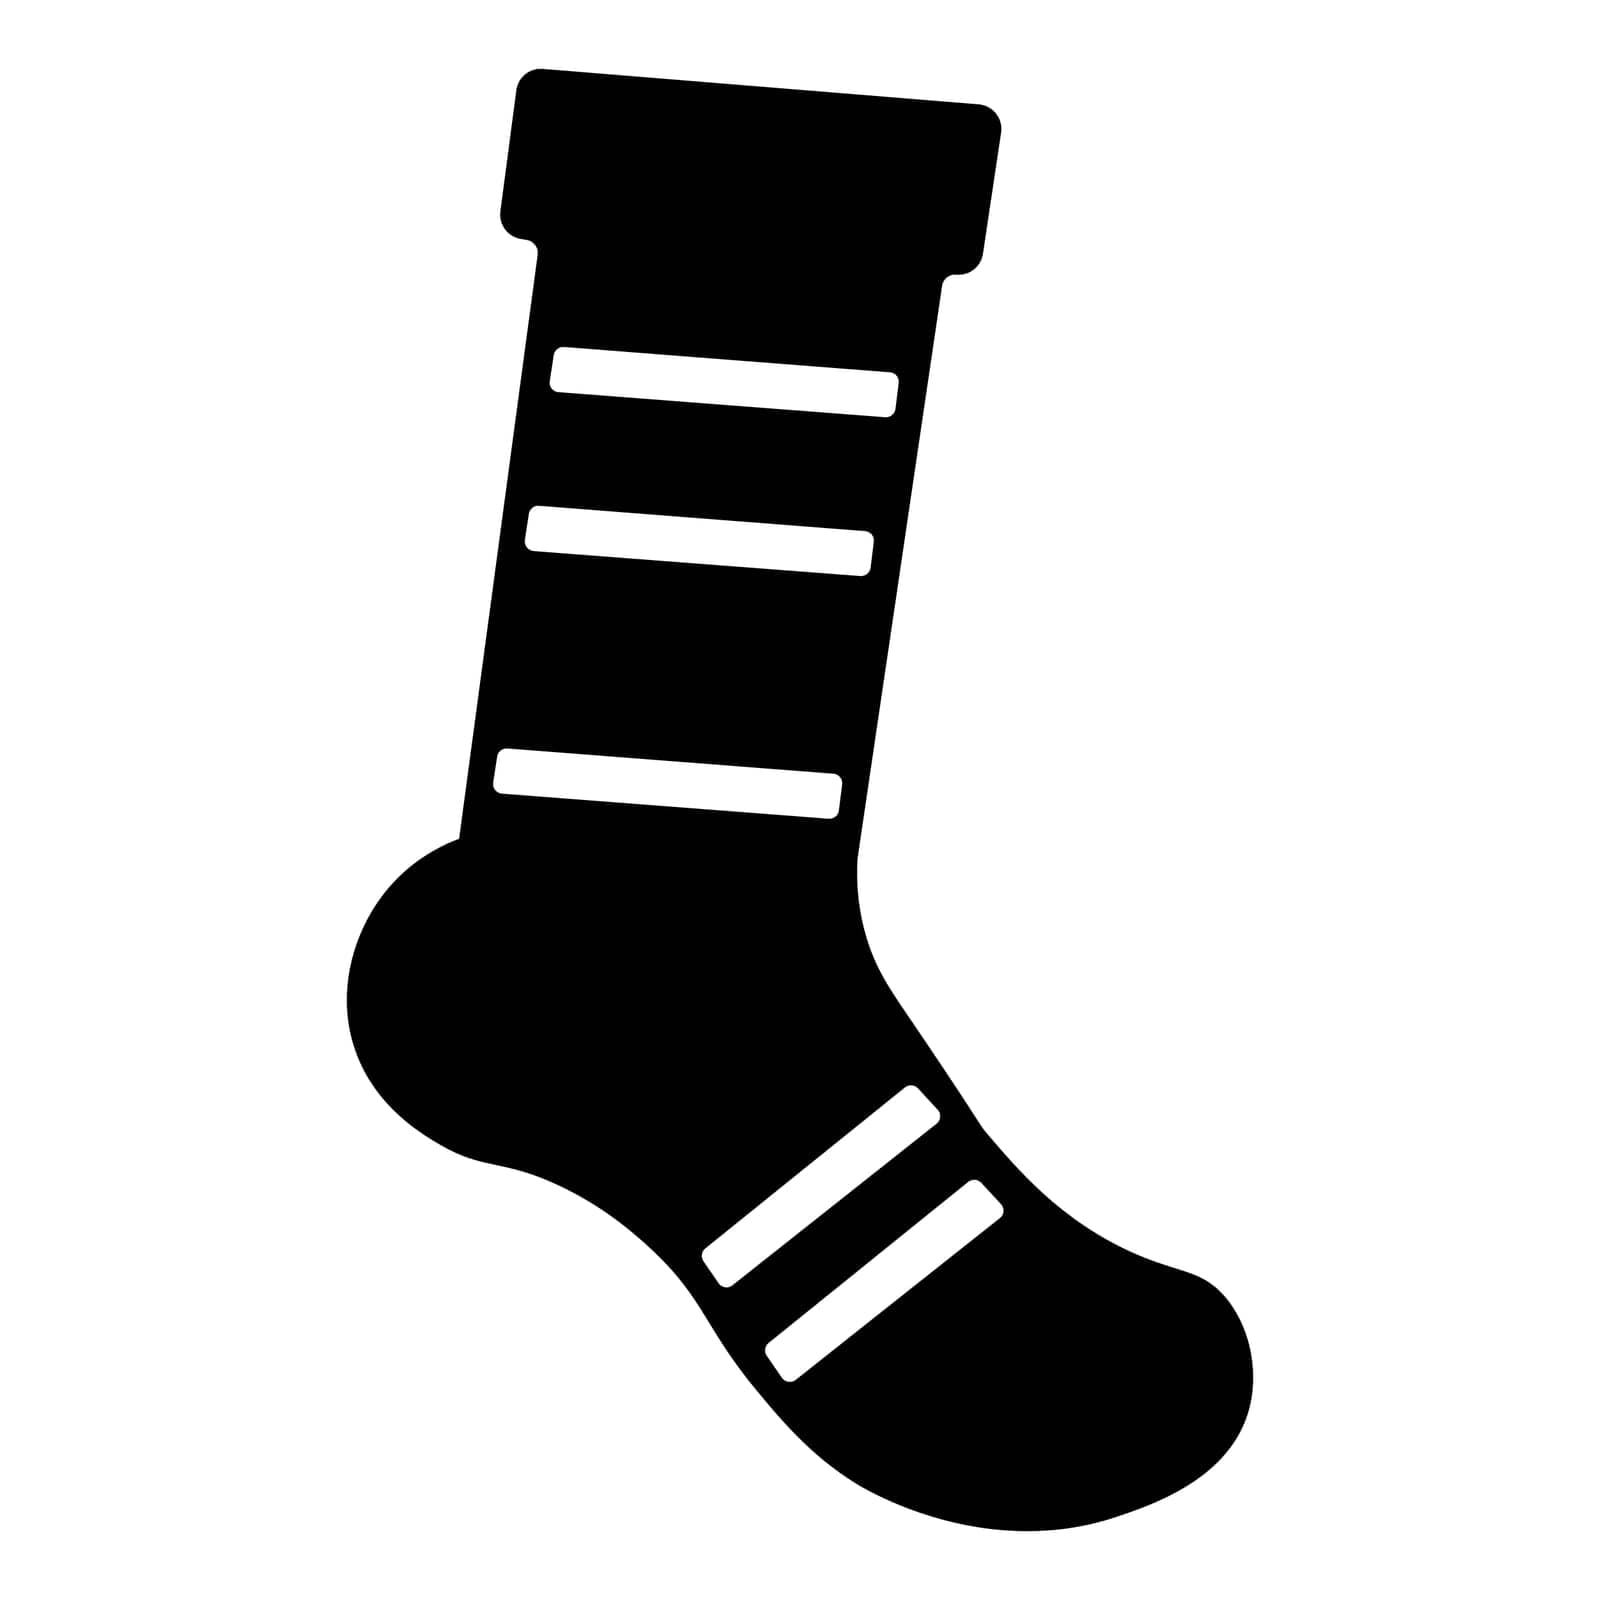 black vector sock icon isolated on white background